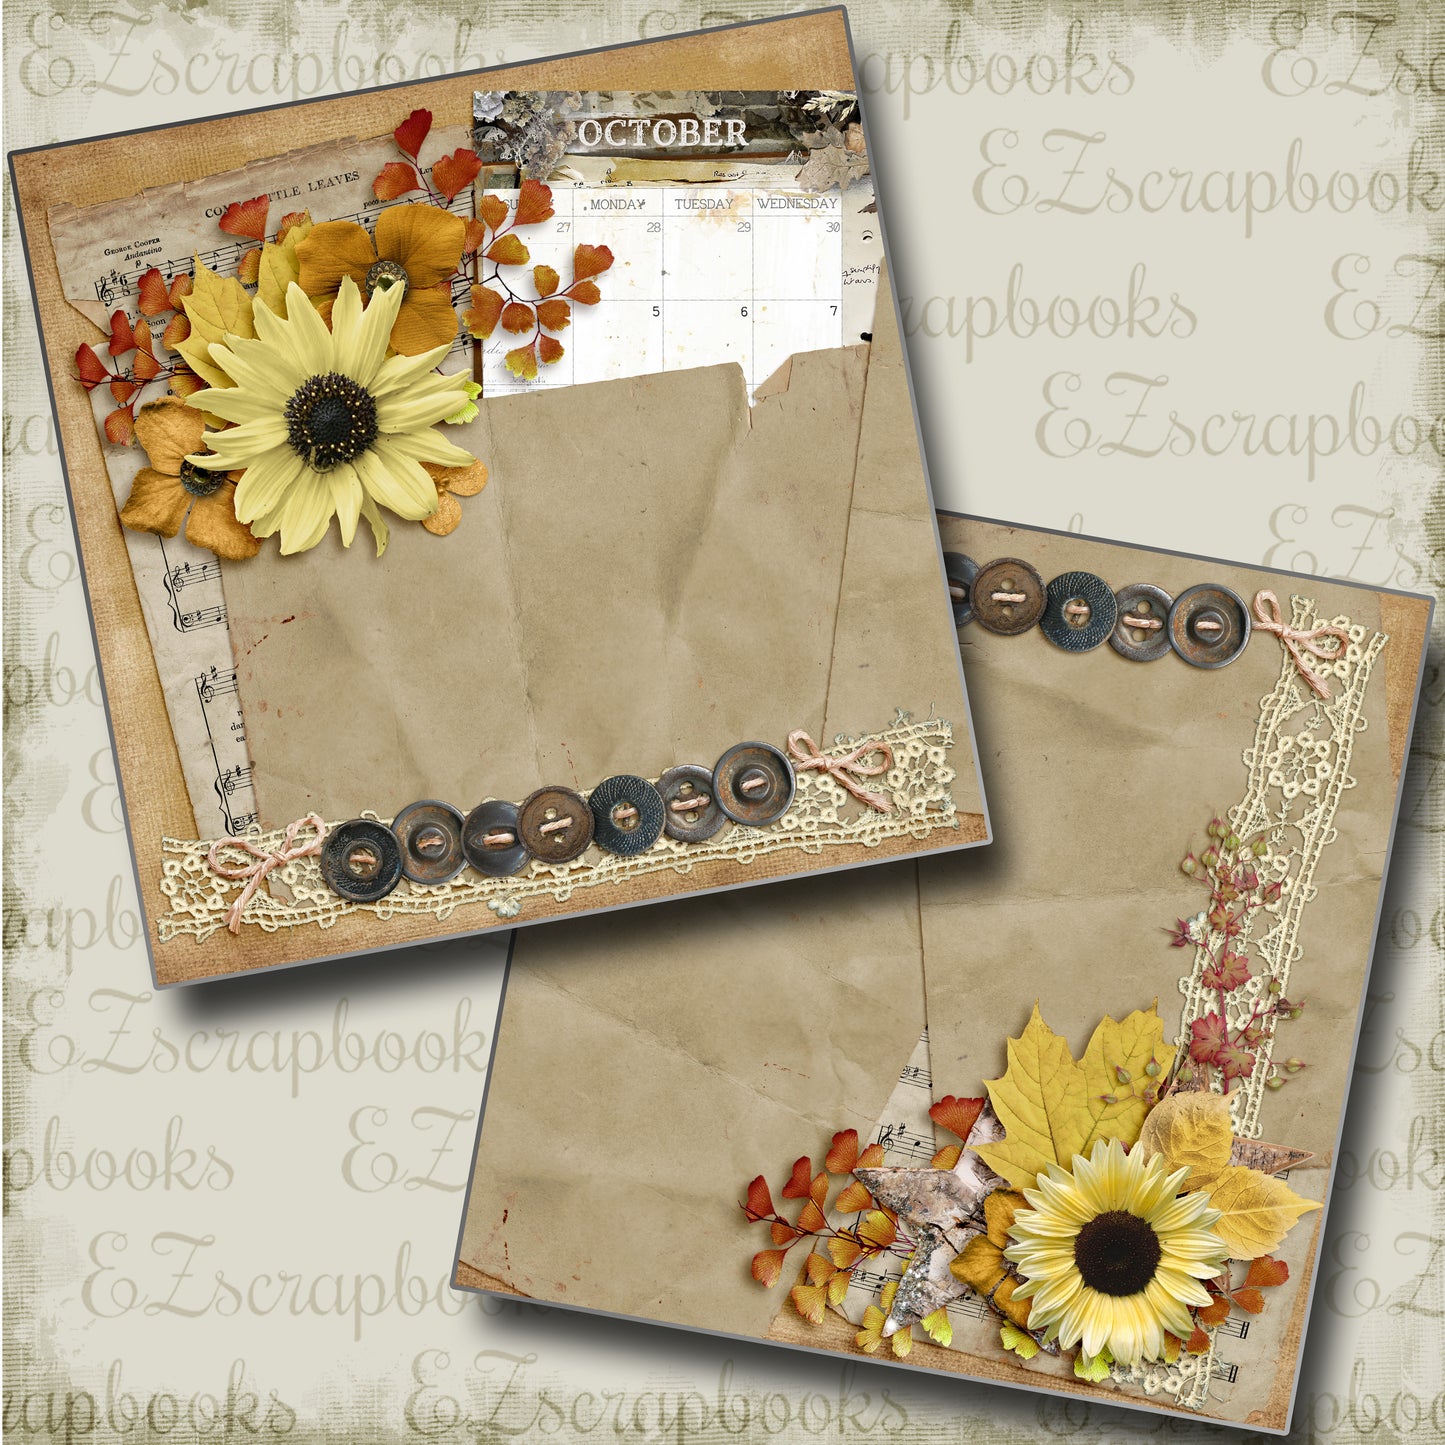 October NPM - 4841 - EZscrapbooks Scrapbook Layouts Months of the Year